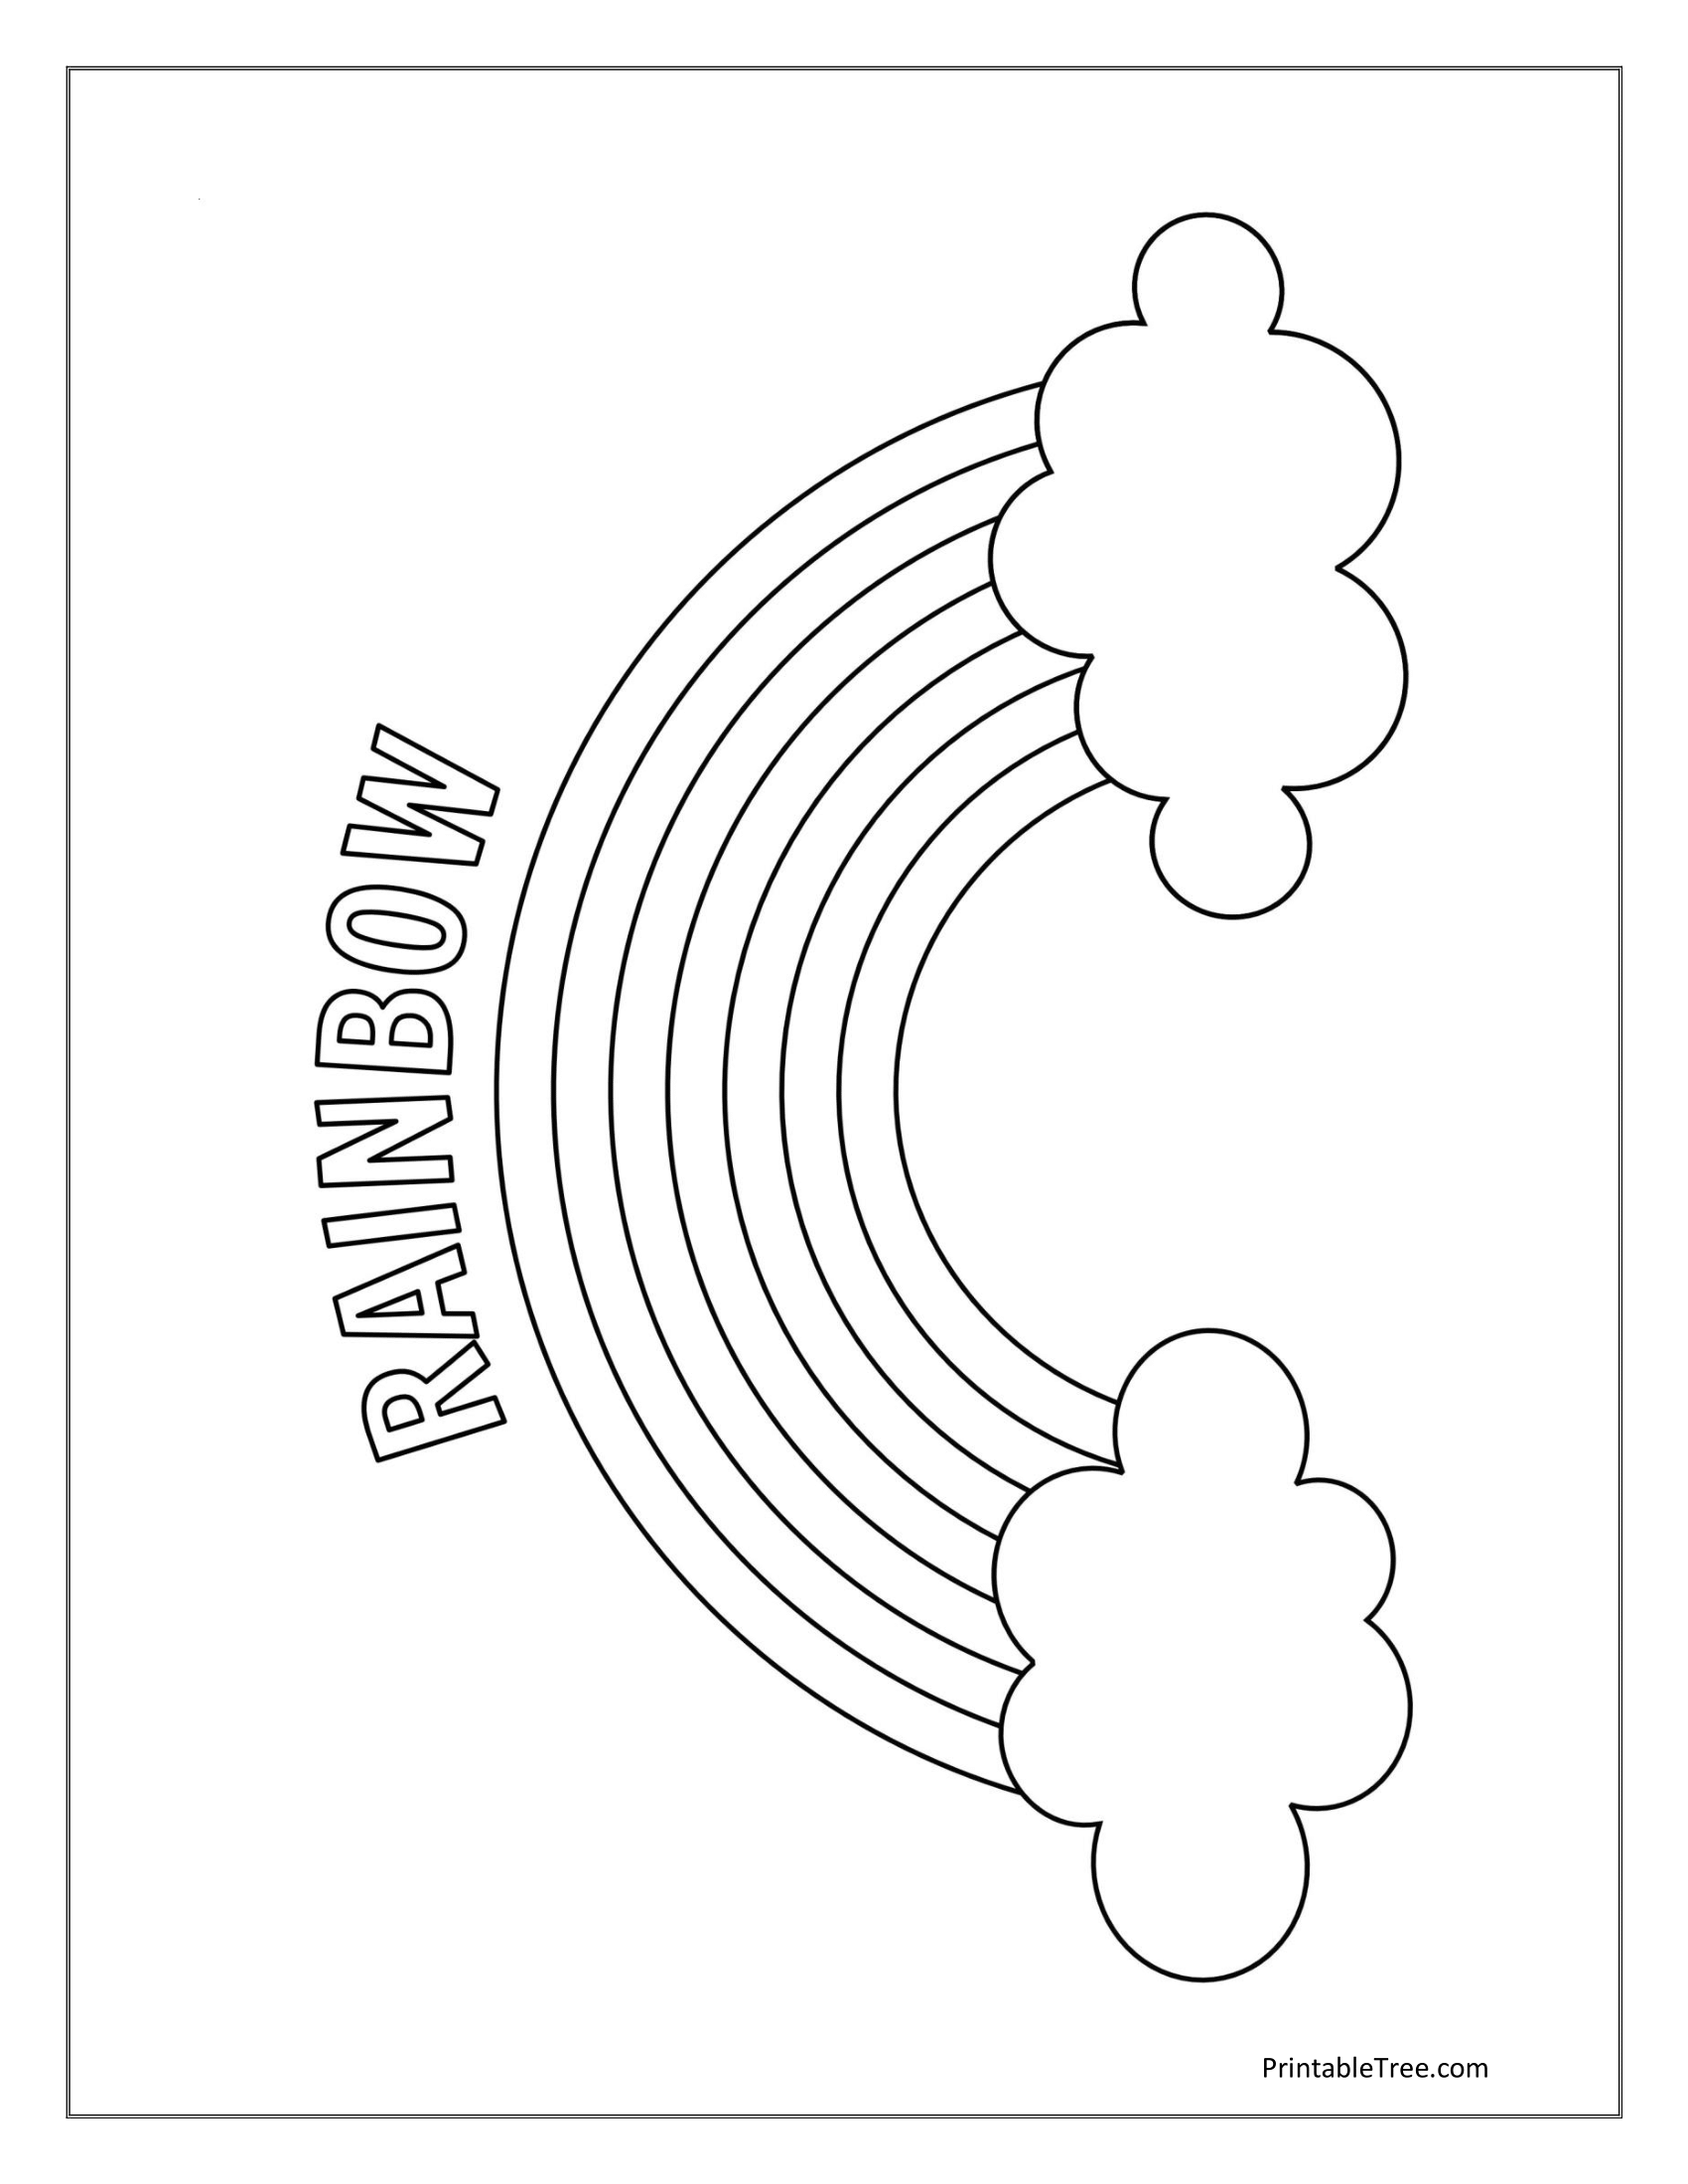 Free printable rainbow coloring pages pdf for kids adults